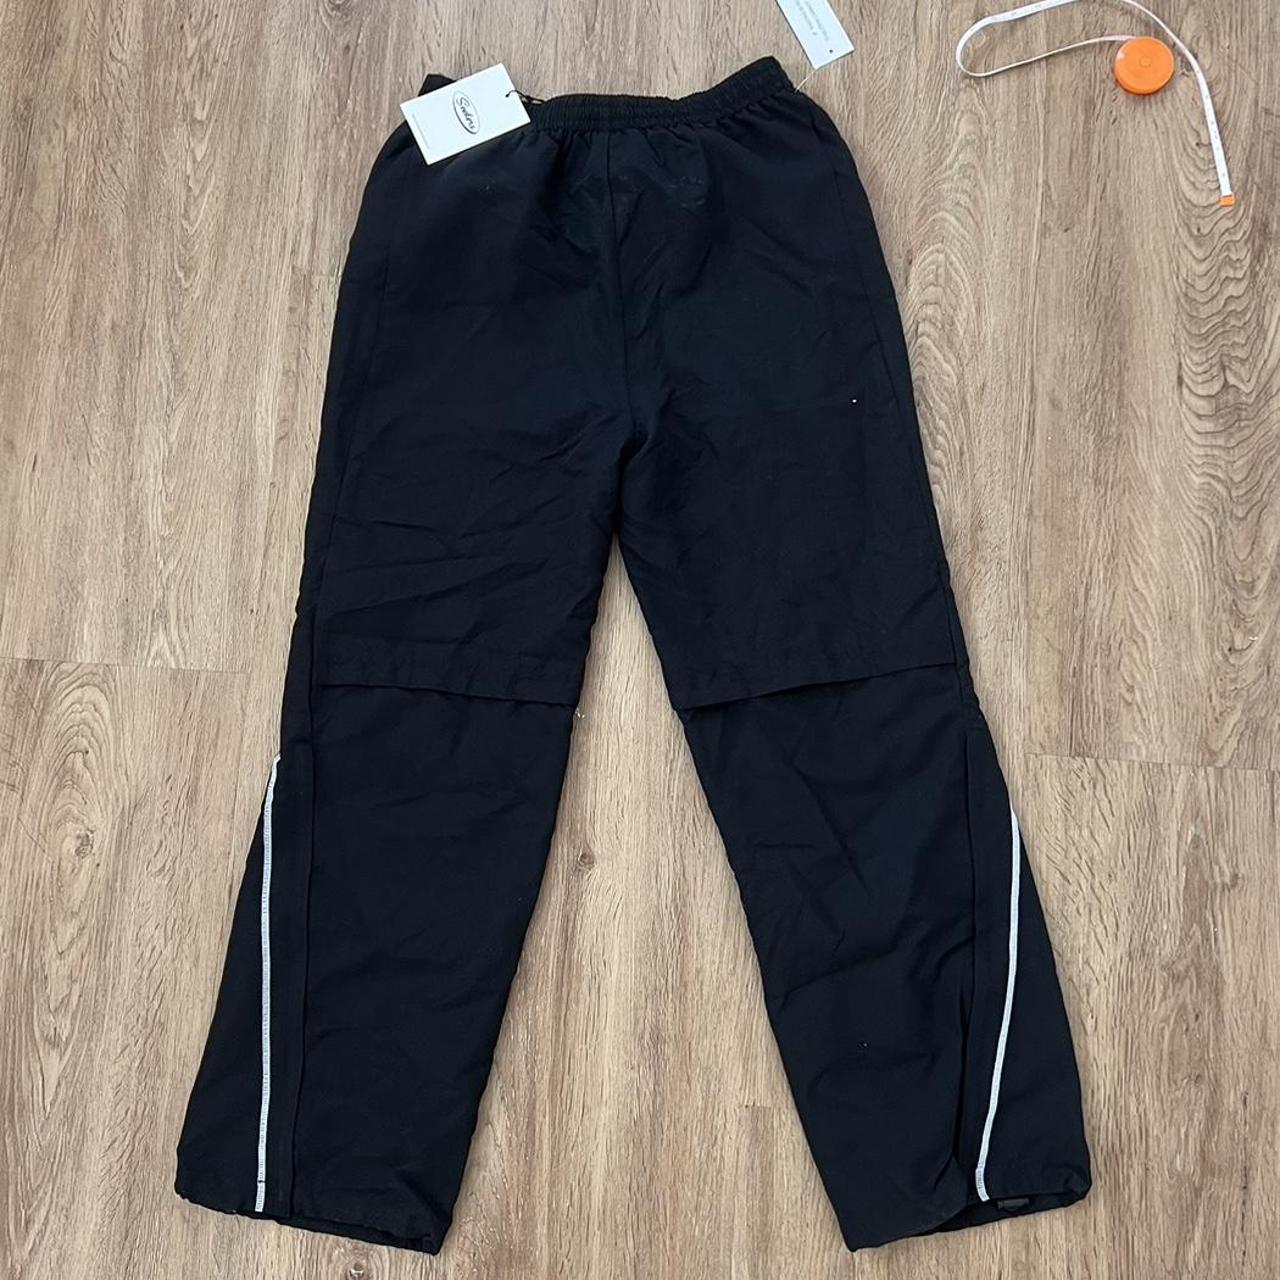 Sister and seekers track pants NWT have zipper and... - Depop